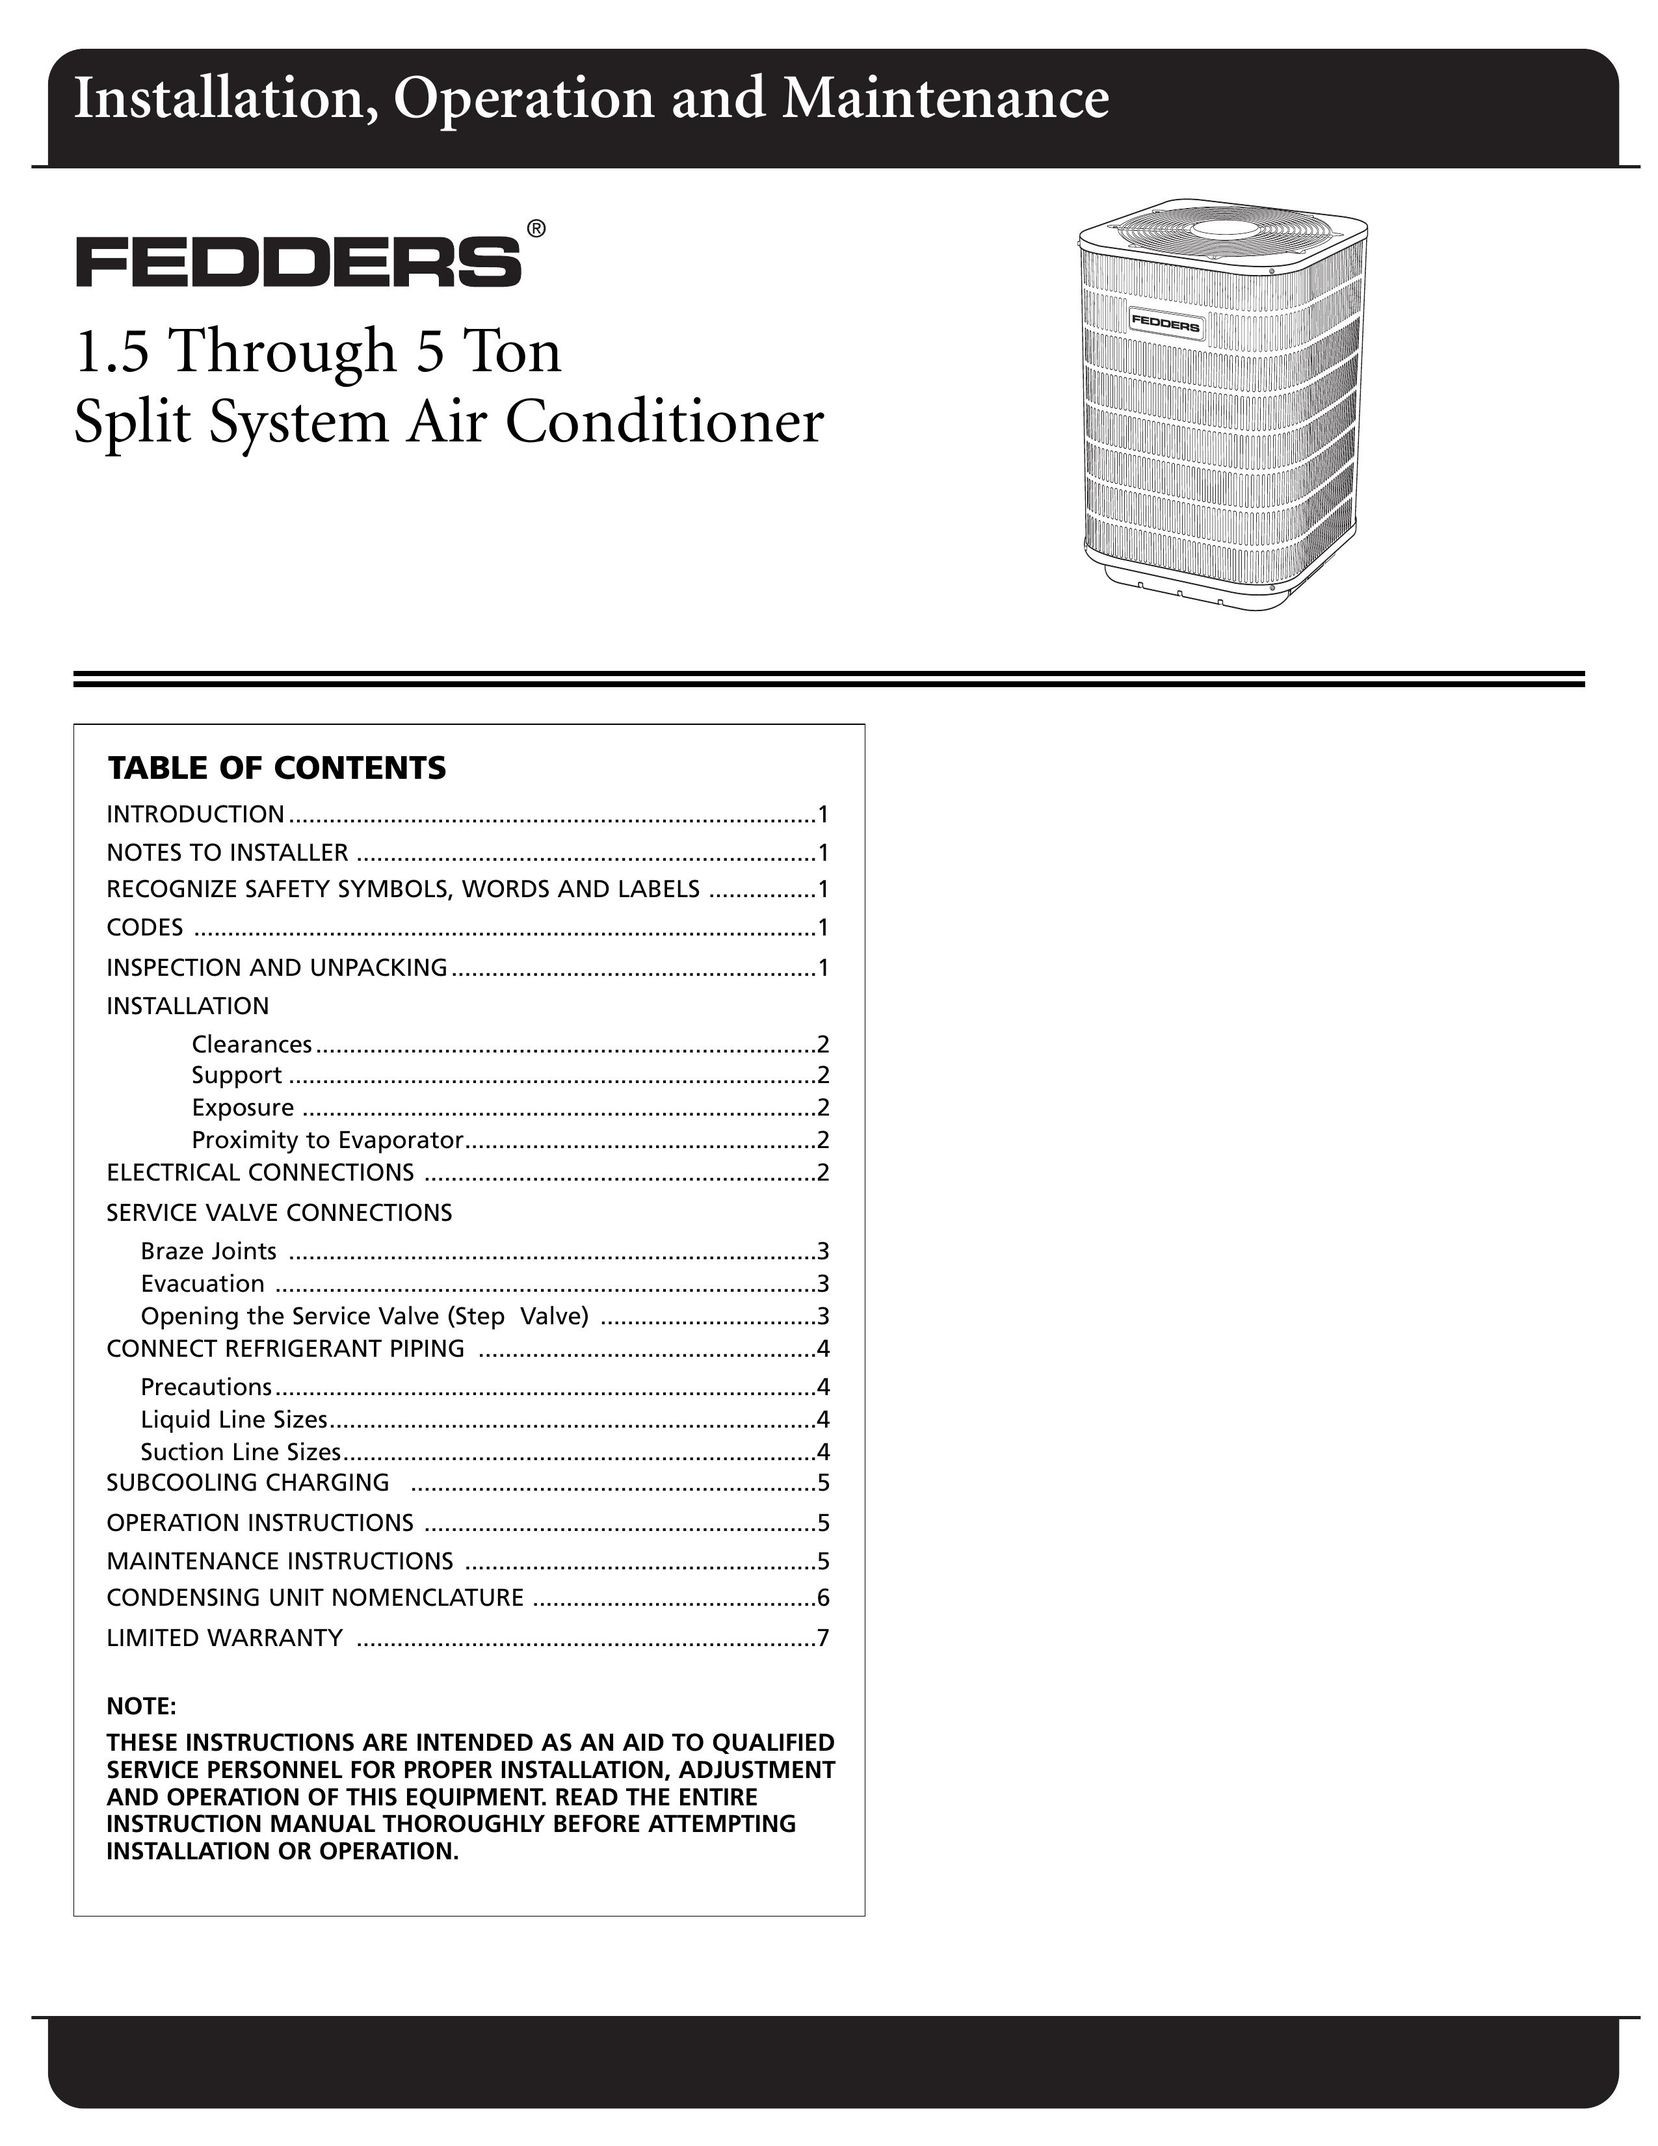 Fedders Split System Air Conditioner Air Conditioner User Manual